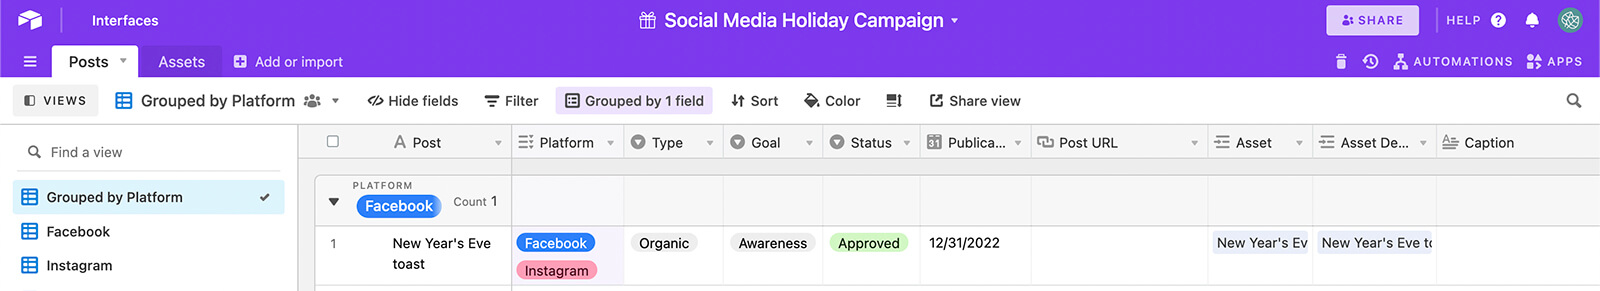 social-media-marketing-guide-holiday-campaigns-2022-elements-example-1